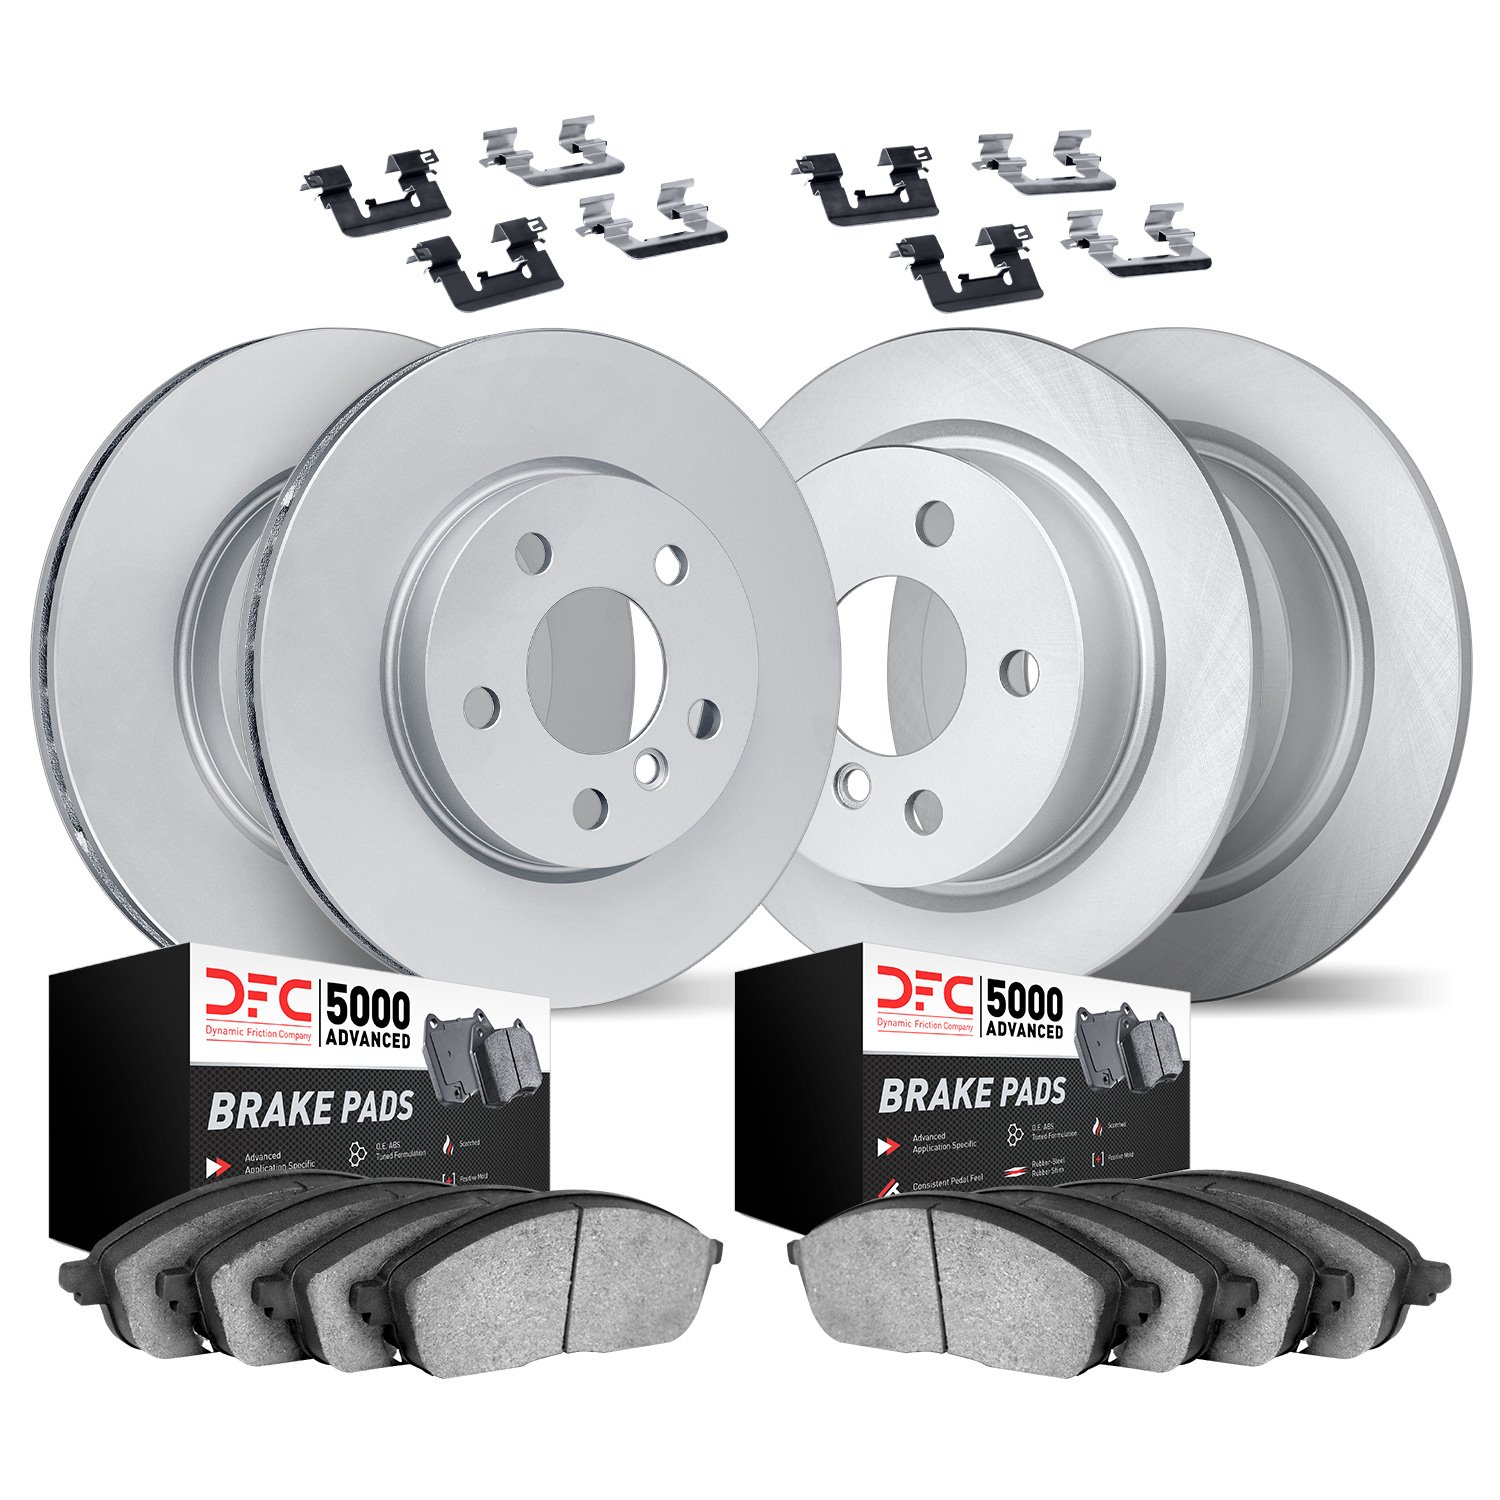 9514-20021 GEOMET Brake Rotors w/5000 Advanced Brake Pads Kit & Hardware, 2018-2019 Land Rover, Position: Front and Rear